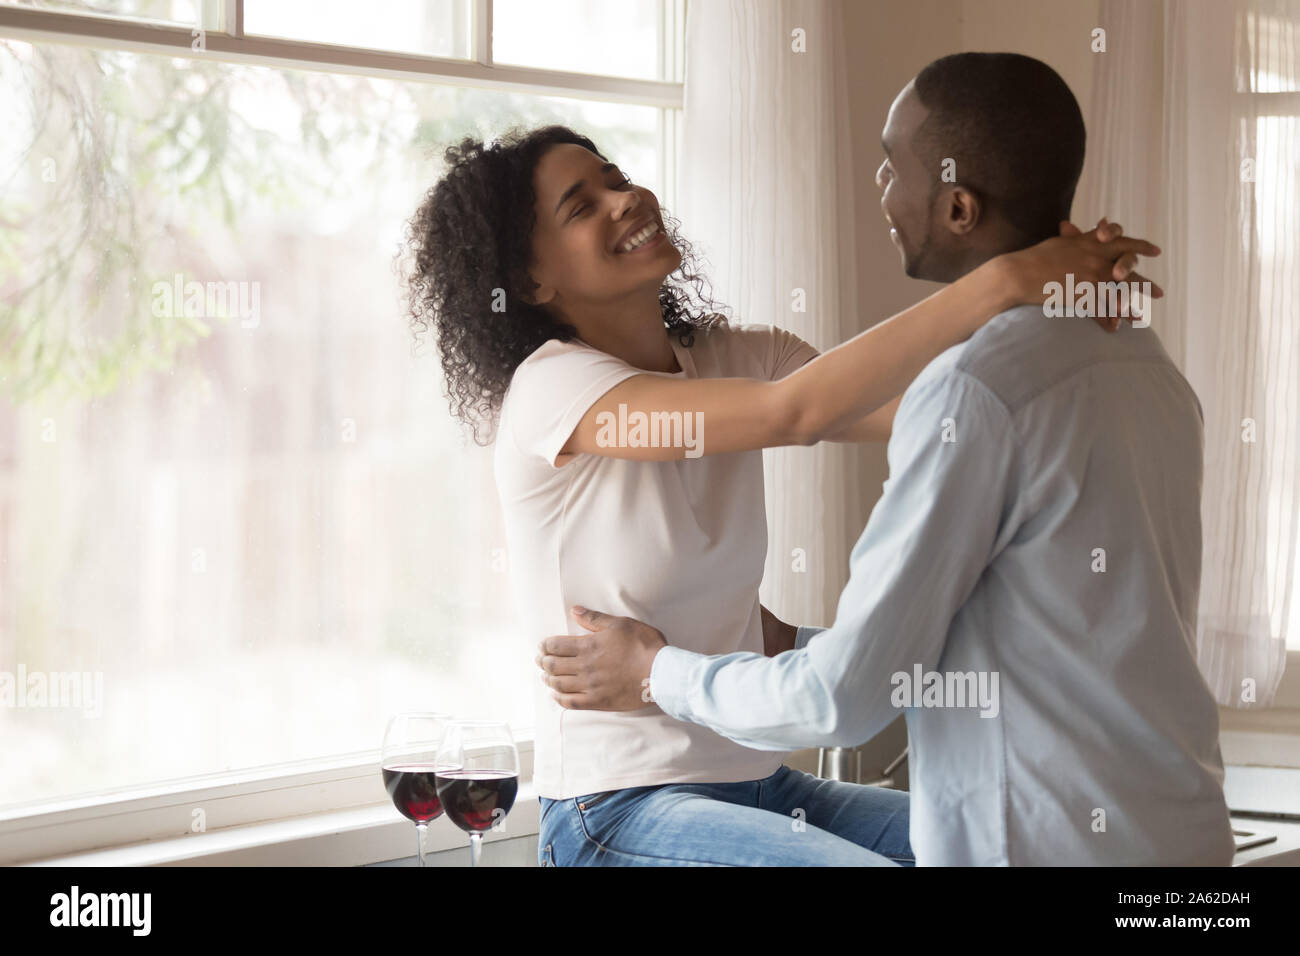 Laughing just married family couple enjoying weekend time at kitchen. Stock Photo